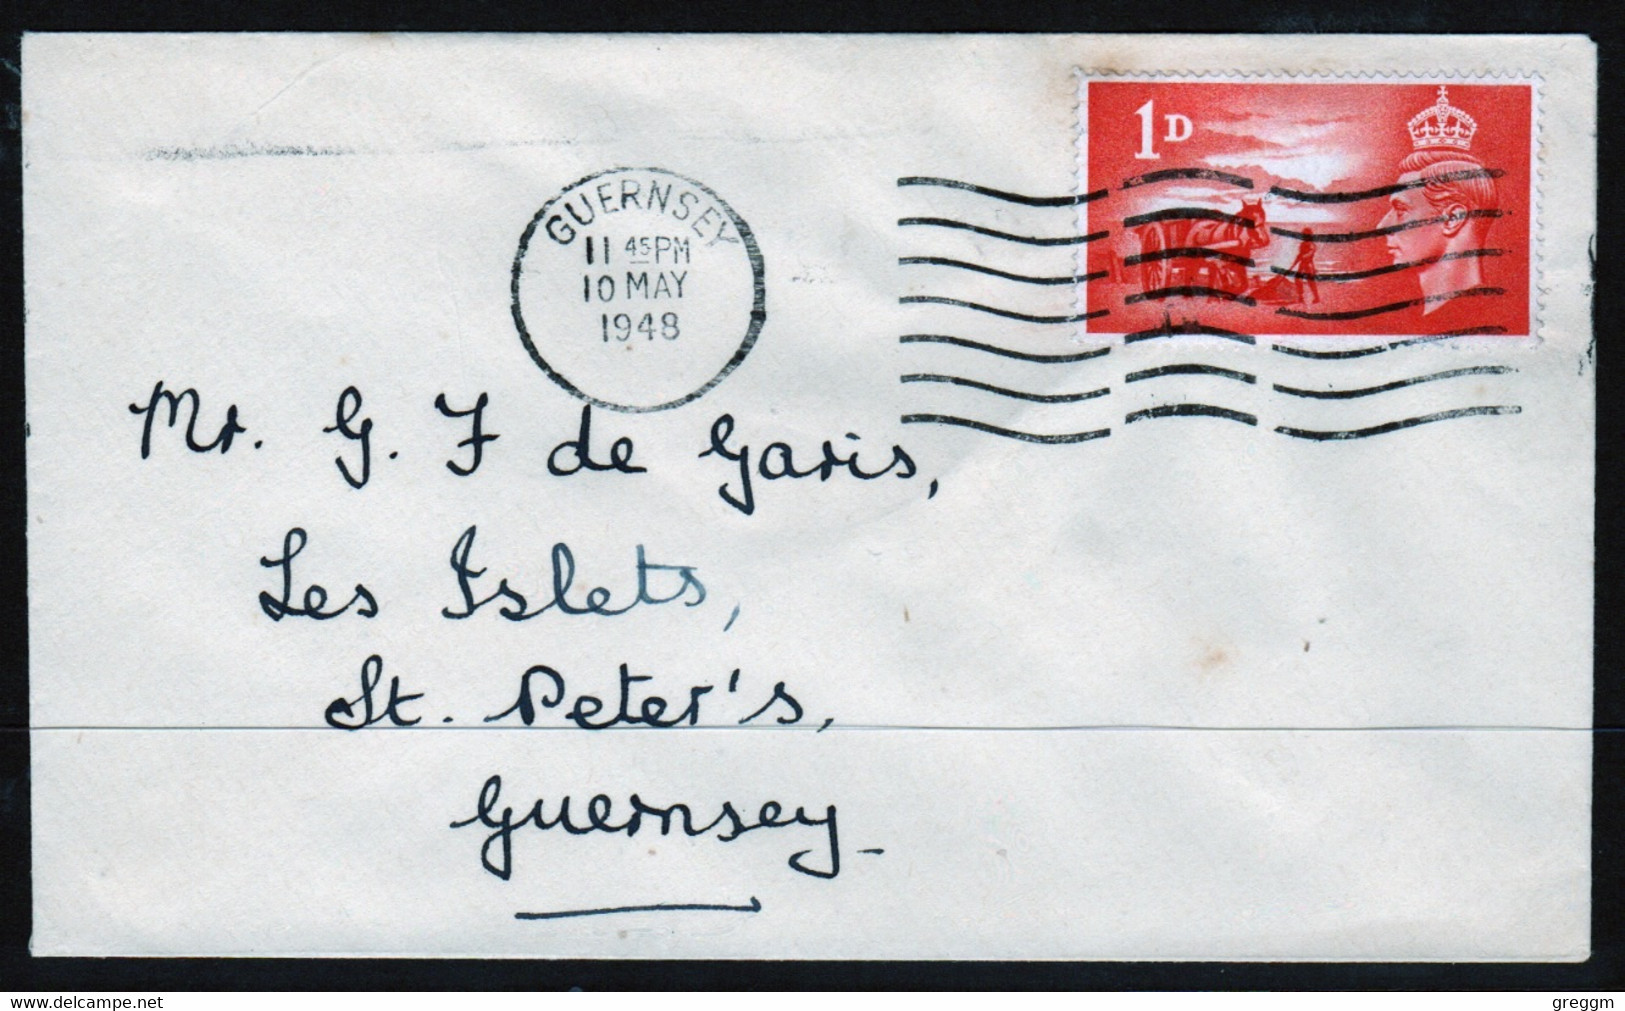 Channel Islands Regional Issue First Day Cover Envelope Only With One Value. - Non Classés